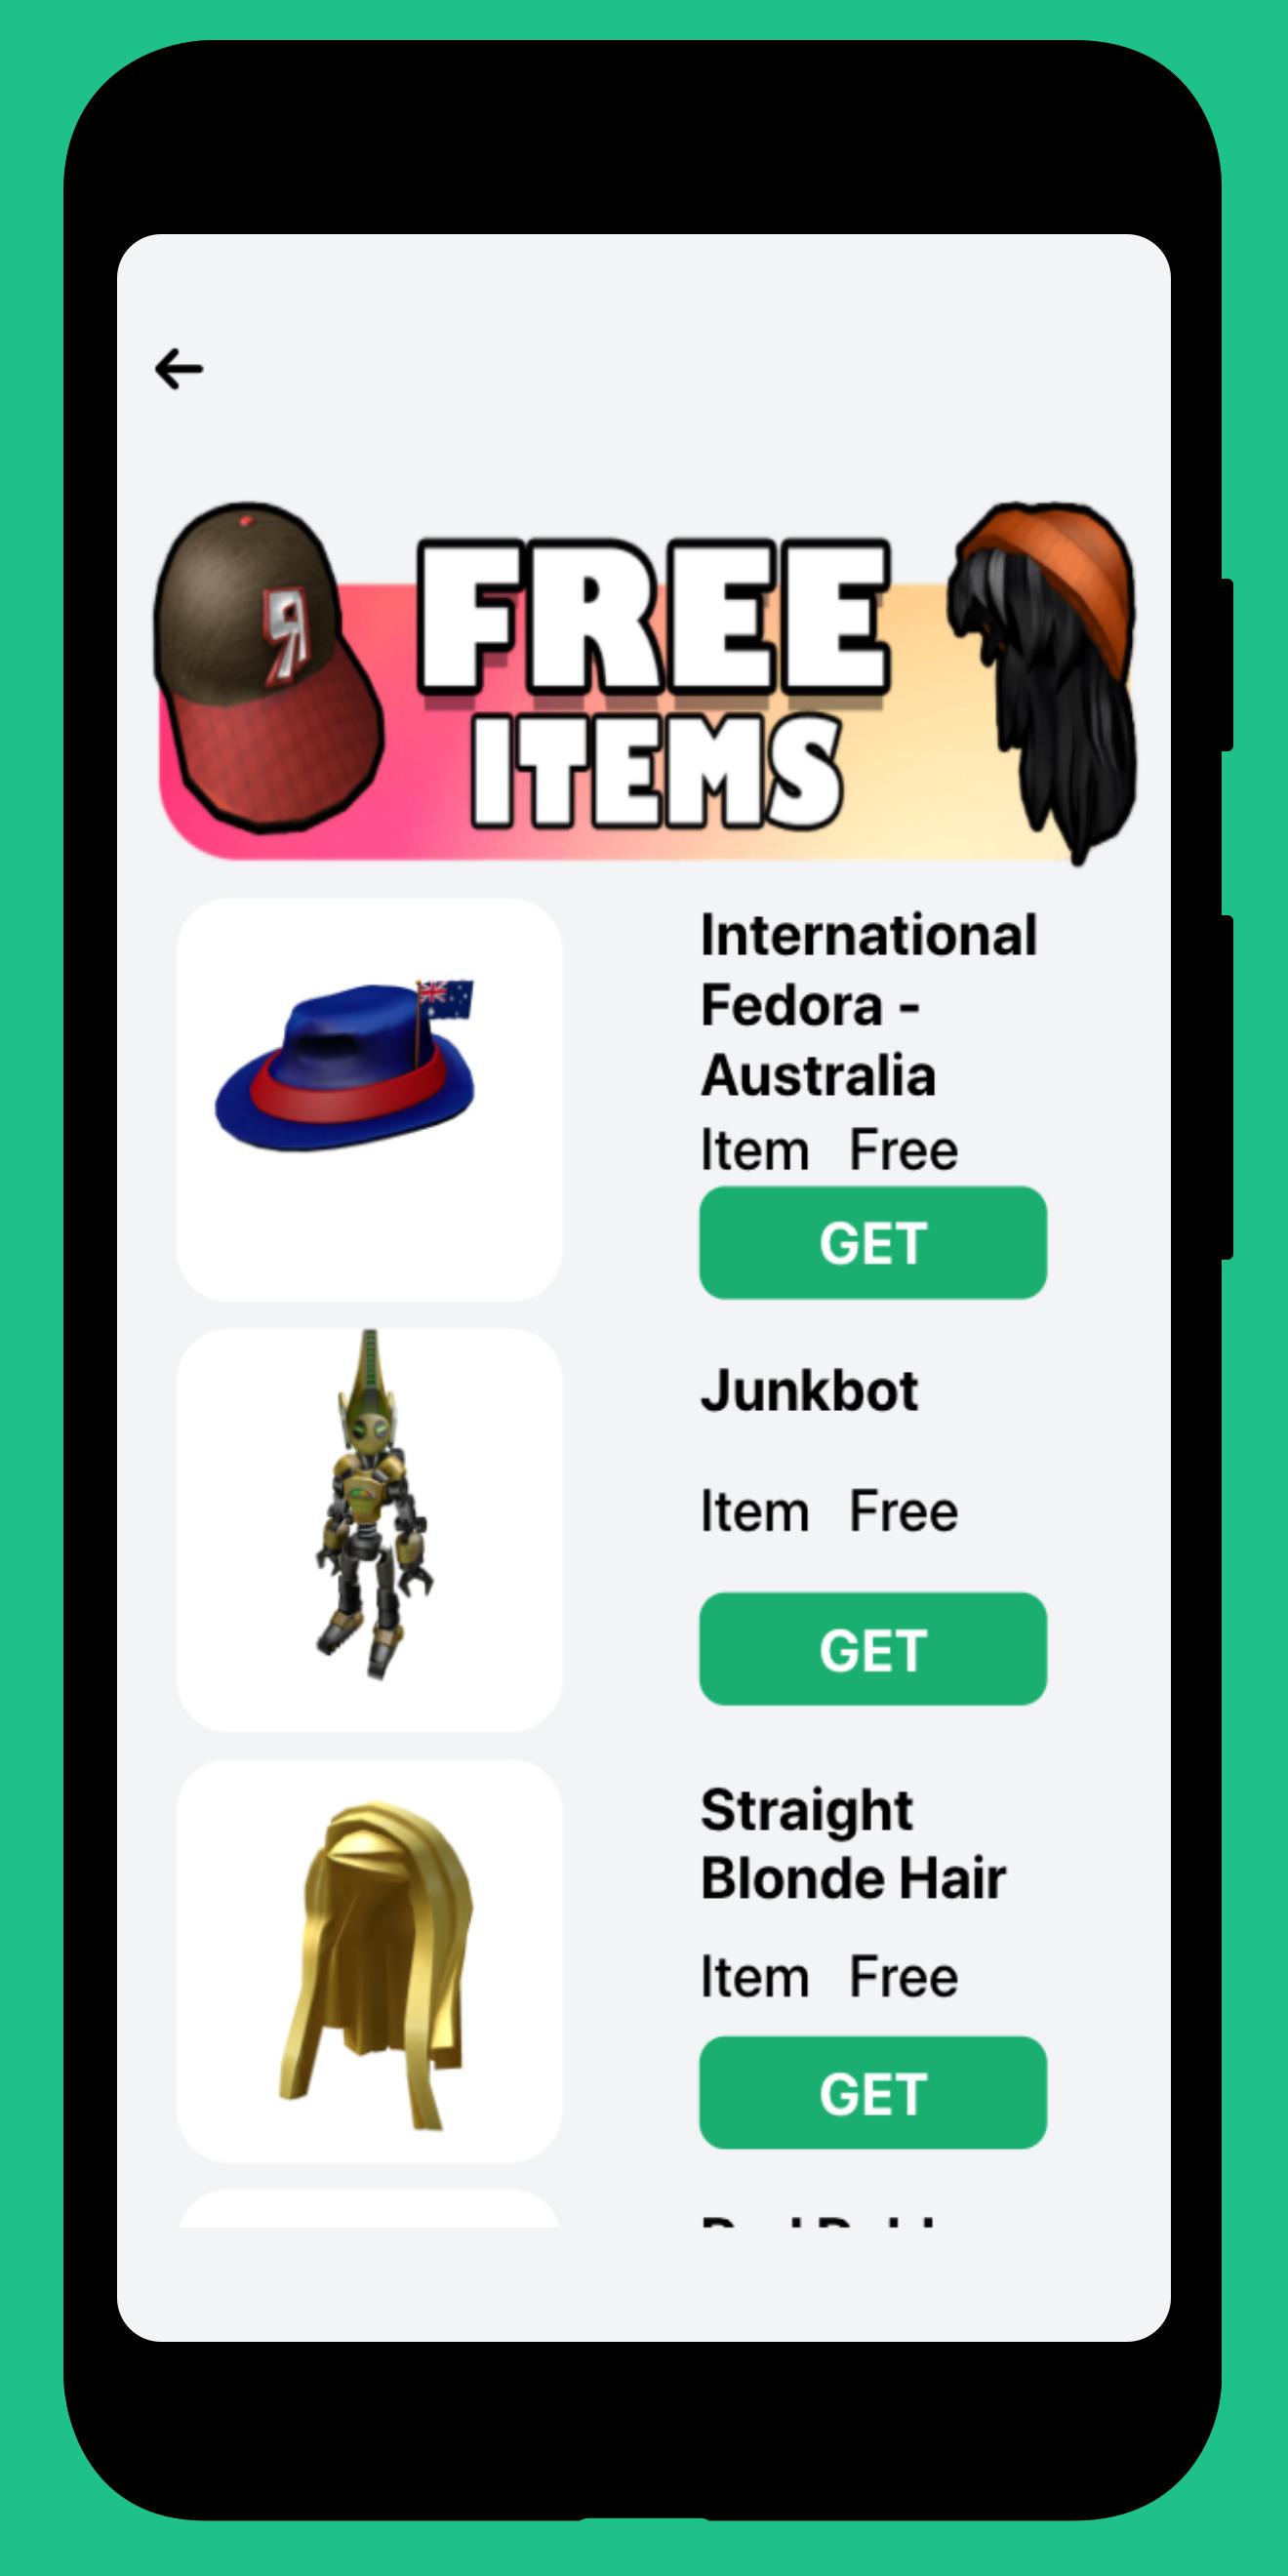 Skins For Roblox For Android Apk Download - download skins for roblox apk for android latest version